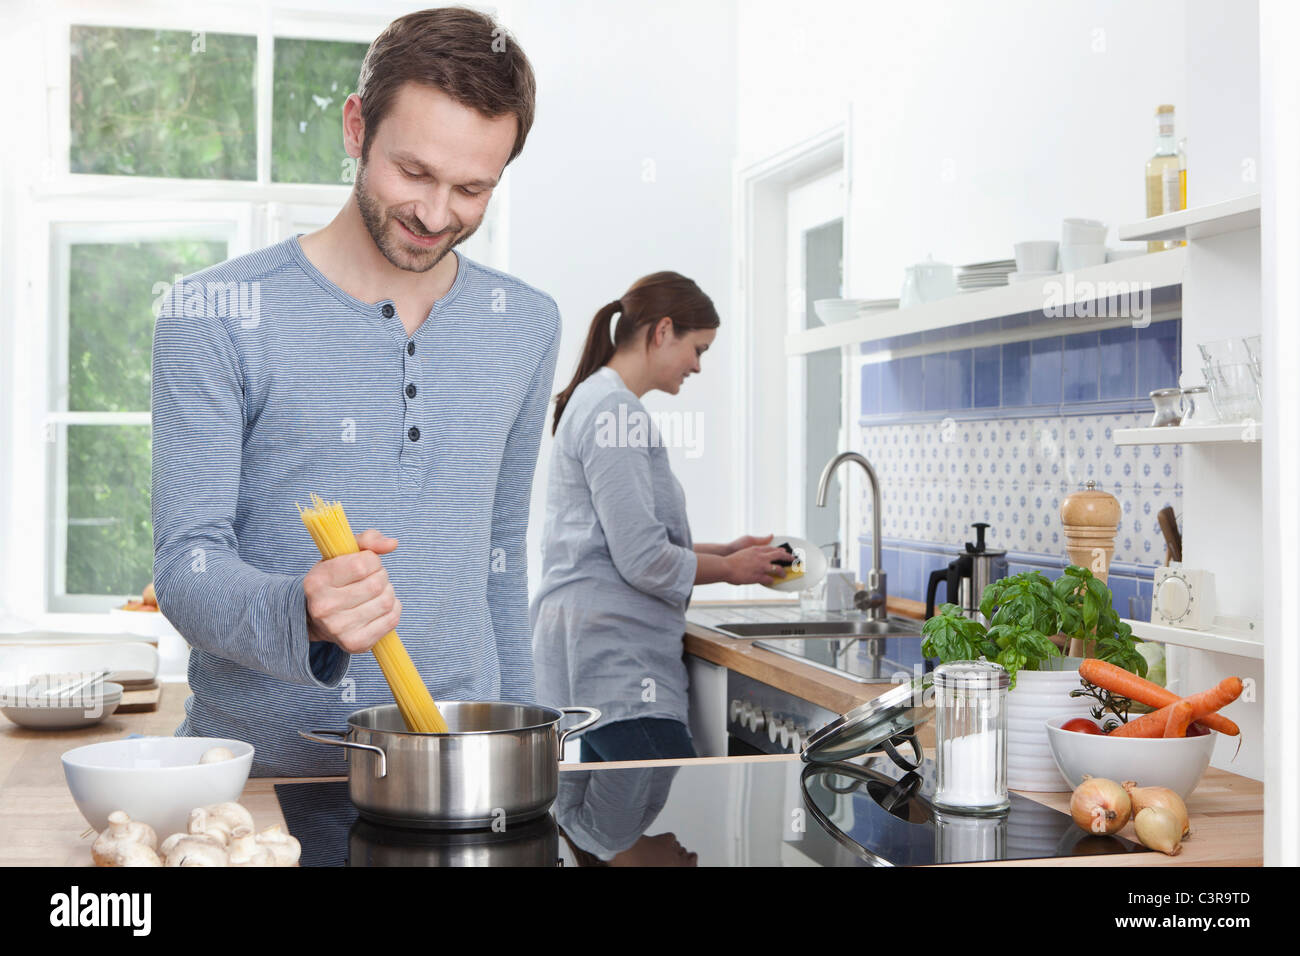 Germany, Bavaria, Munich, Man cooking spaghetti dans cuisine, woman in background Banque D'Images